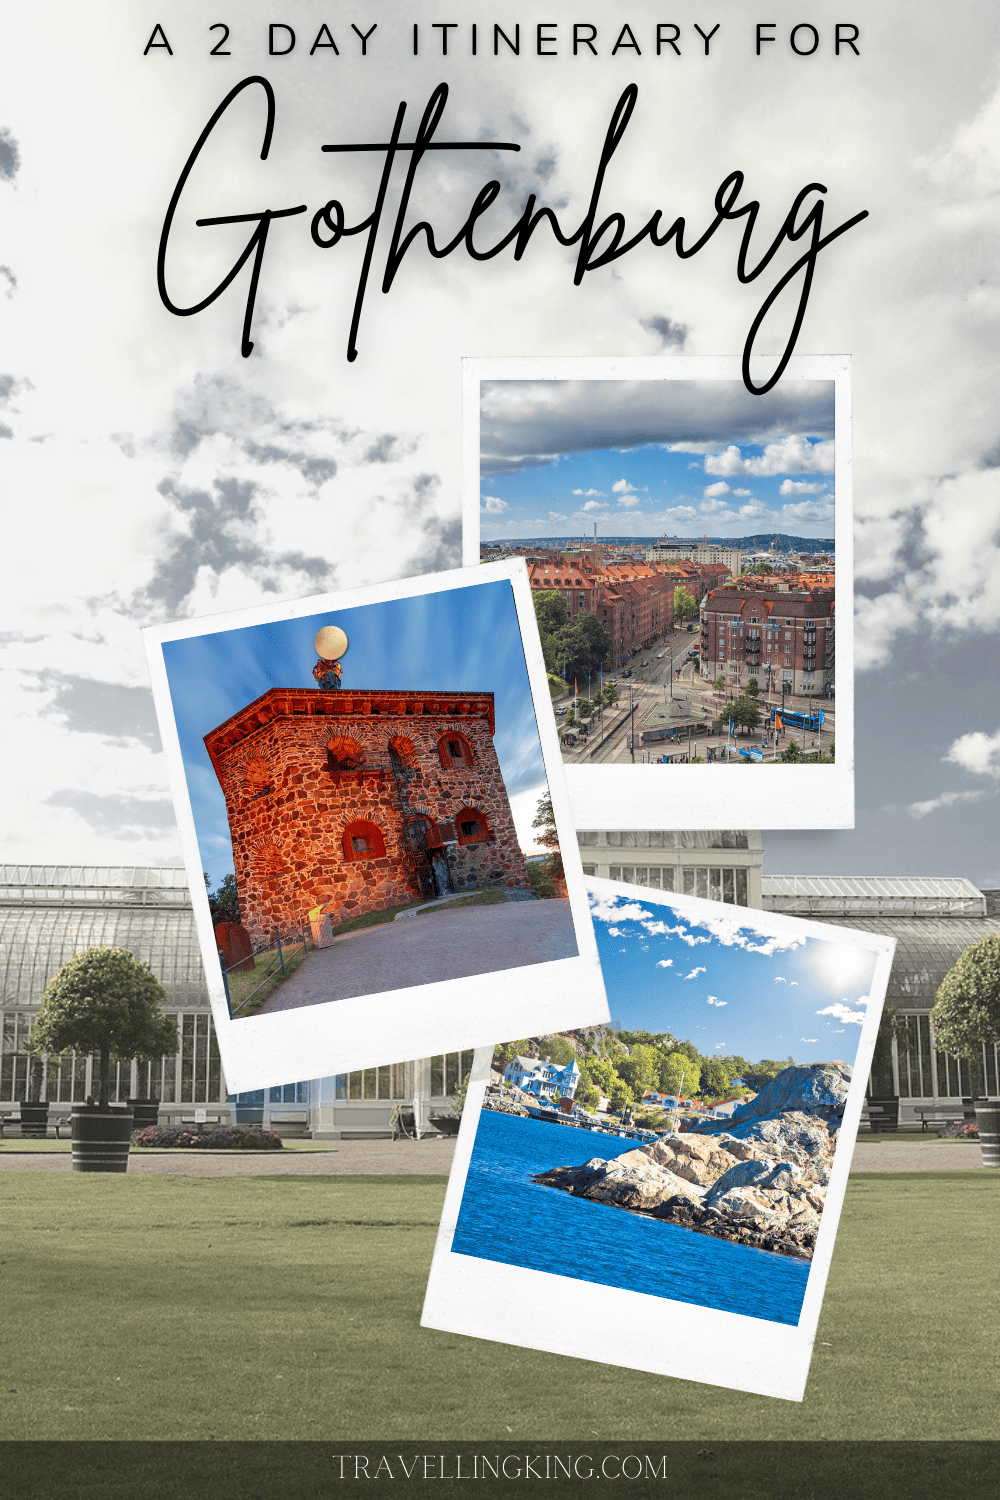 48 hours in Gothenburg - A 2 day Itinerary